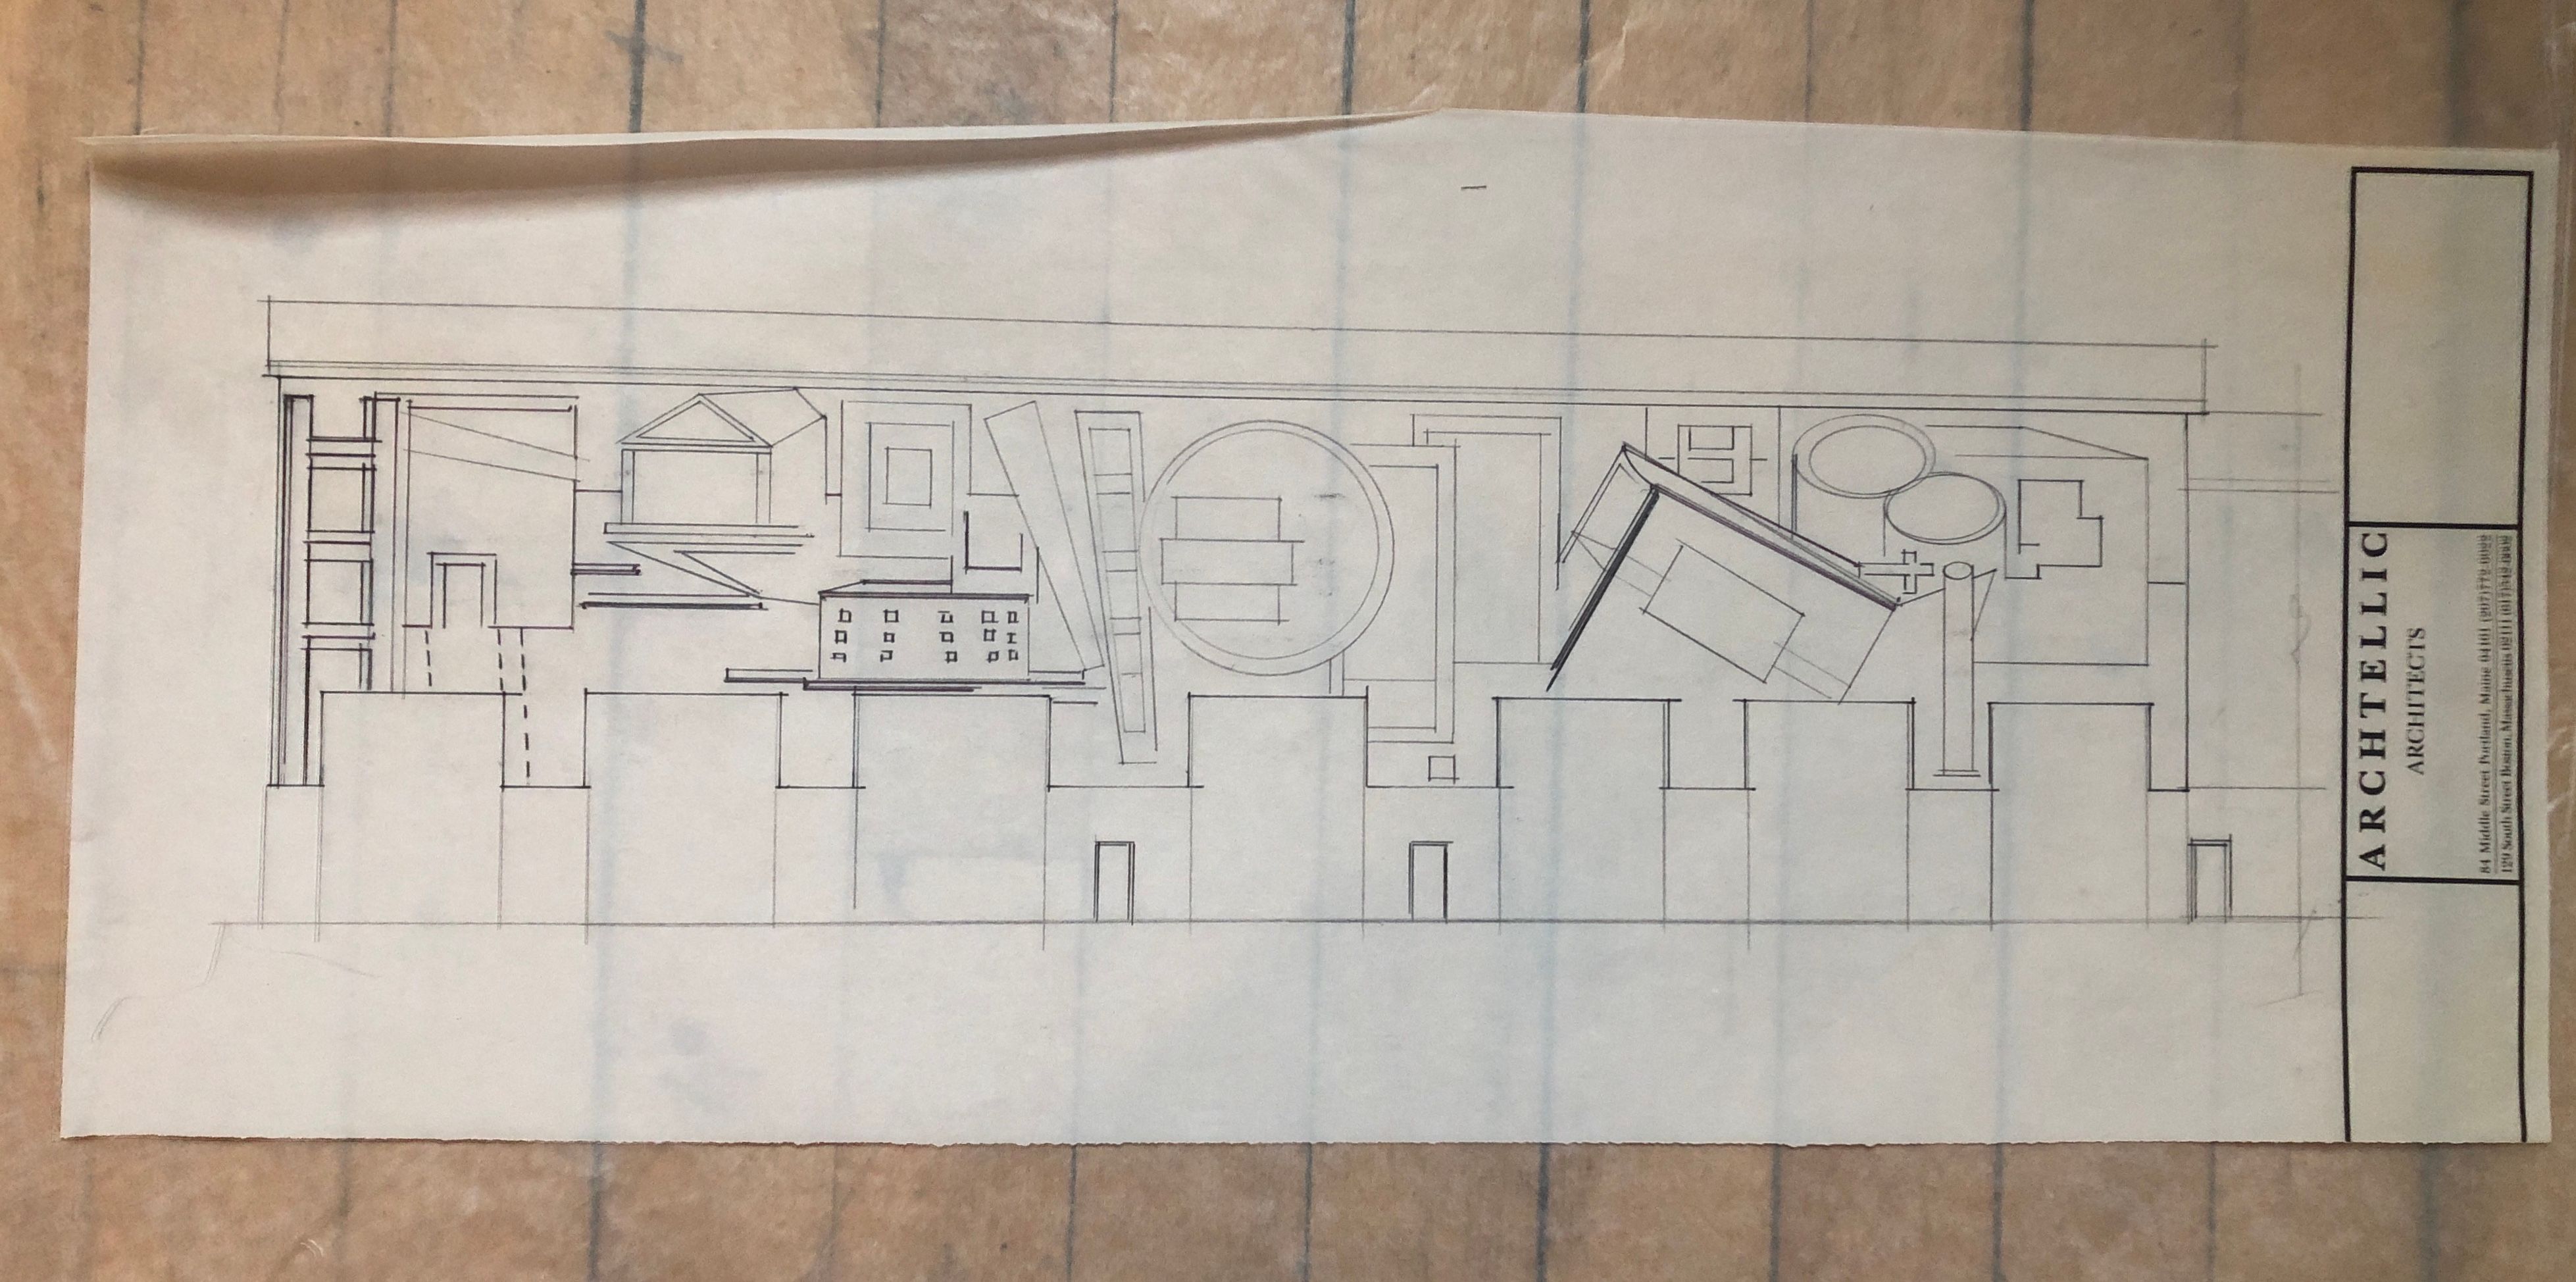 Mural Proposal for Sewage Plant  , late 80s 